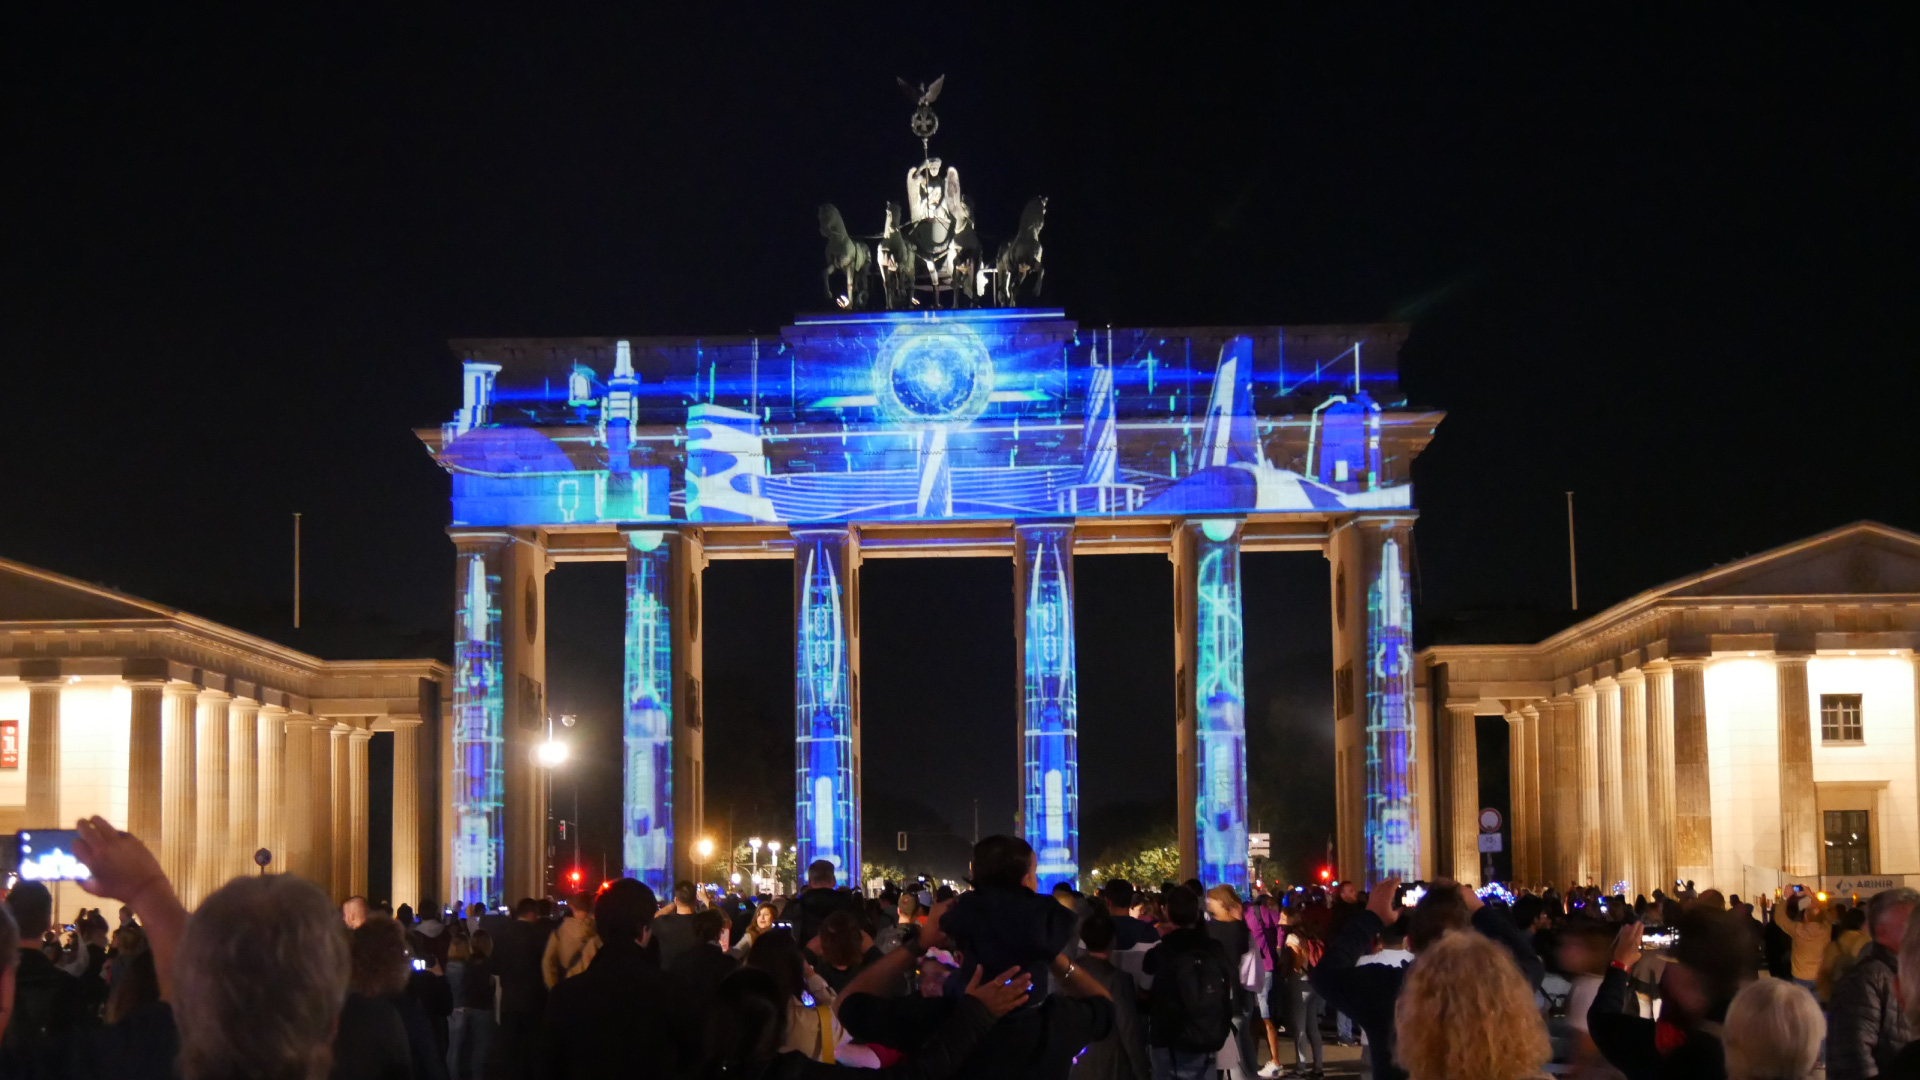 PRG supplied more than 20 projectors for the realization of these illuminations at the Festival of Lights in Berlin at various locations.